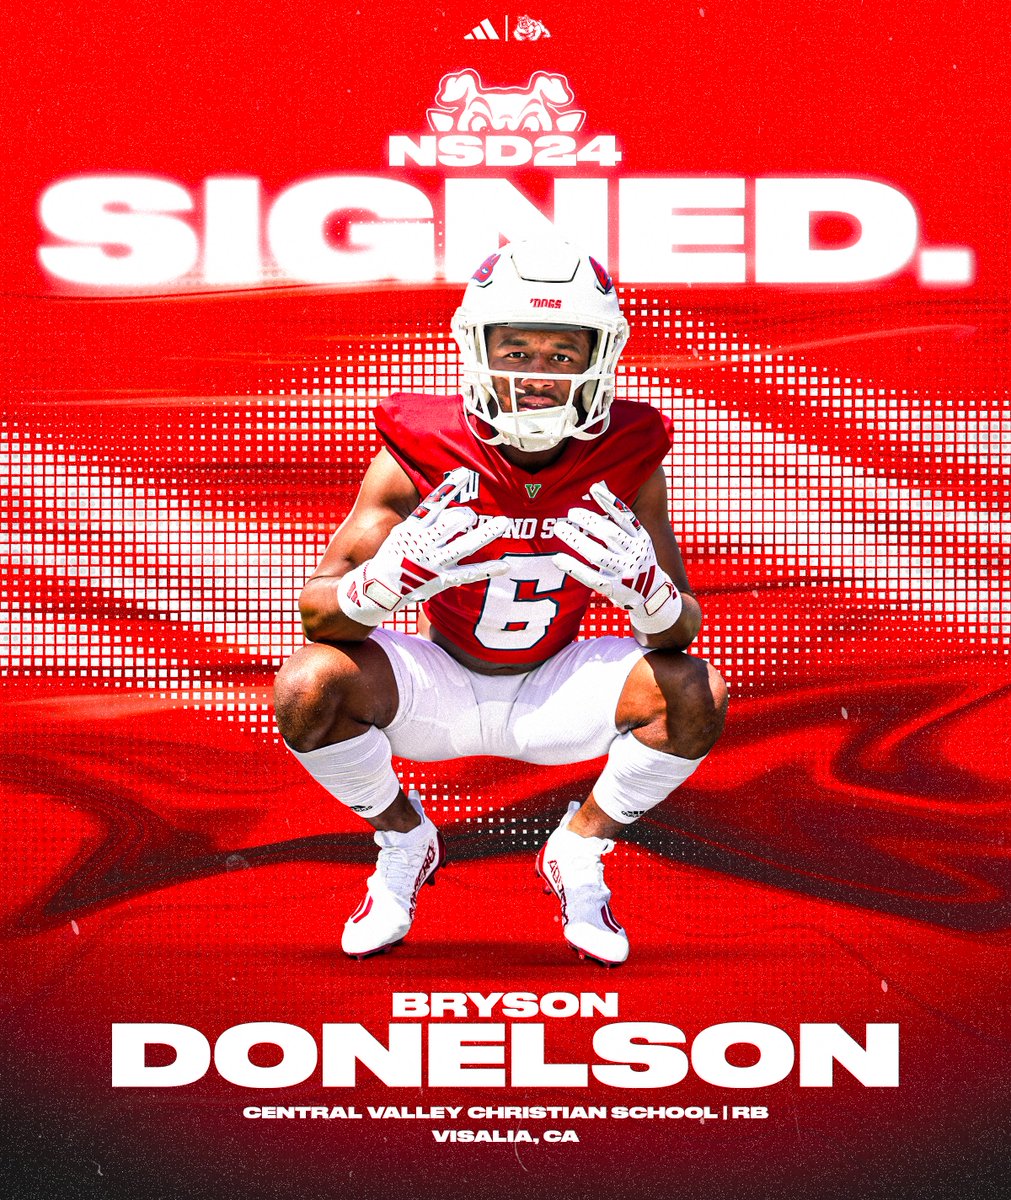 The state's leading rusher is a 𝐁𝐔𝐋𝐋𝐃𝐎𝐆‼️ Welcome to the Bulldog family, @bryson_donelson 🤝